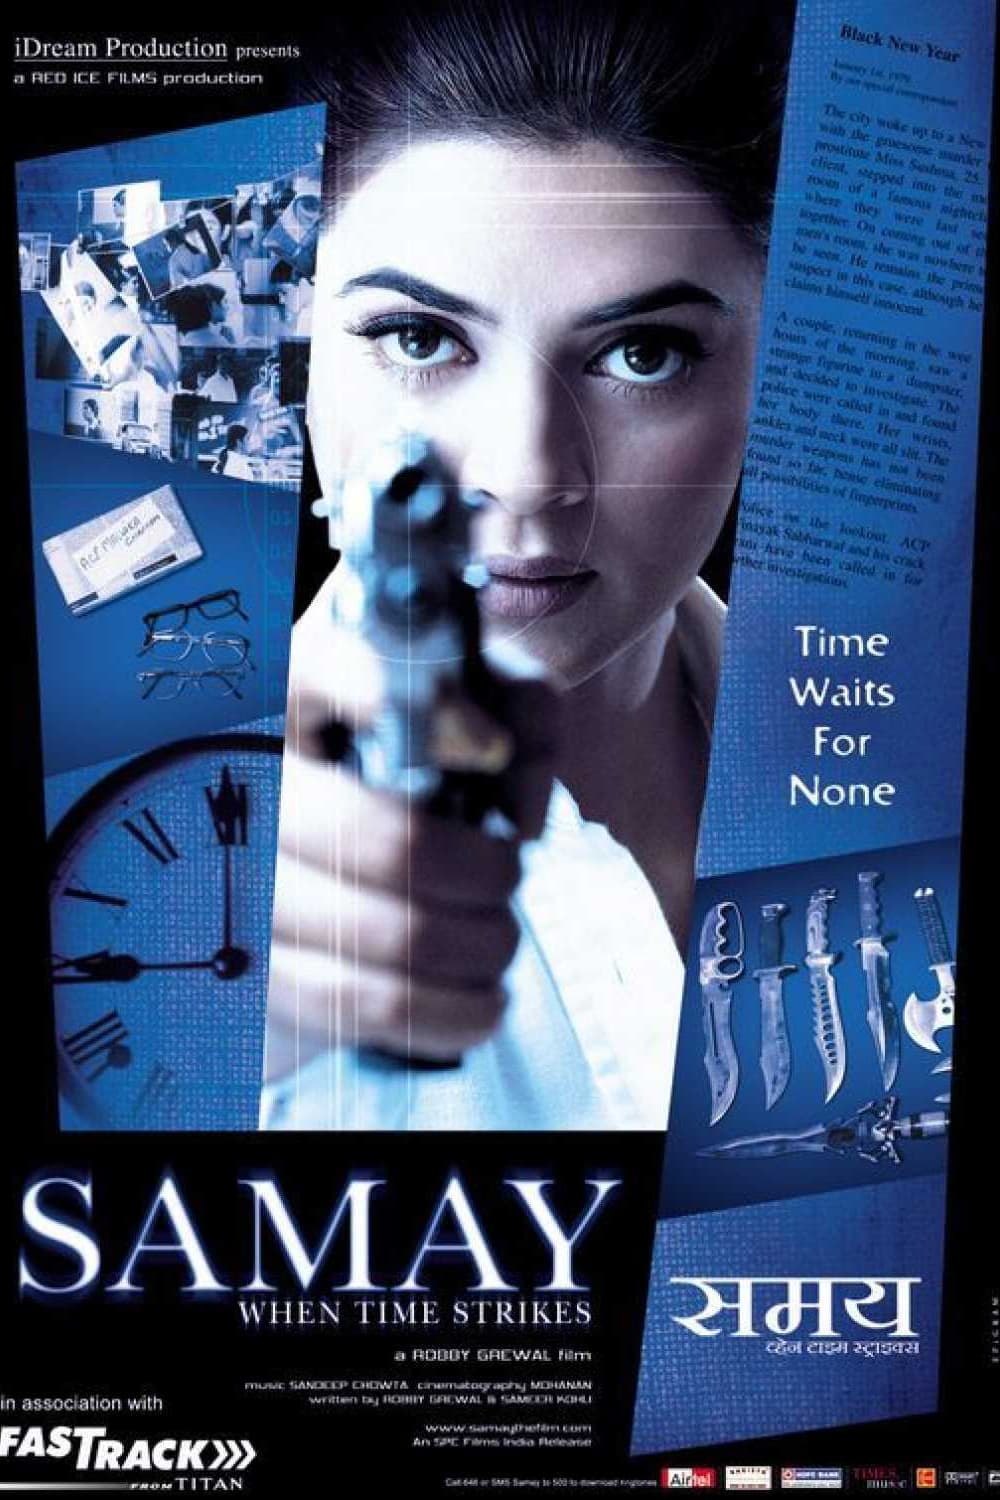 Samay: When Time Strikes (2003)